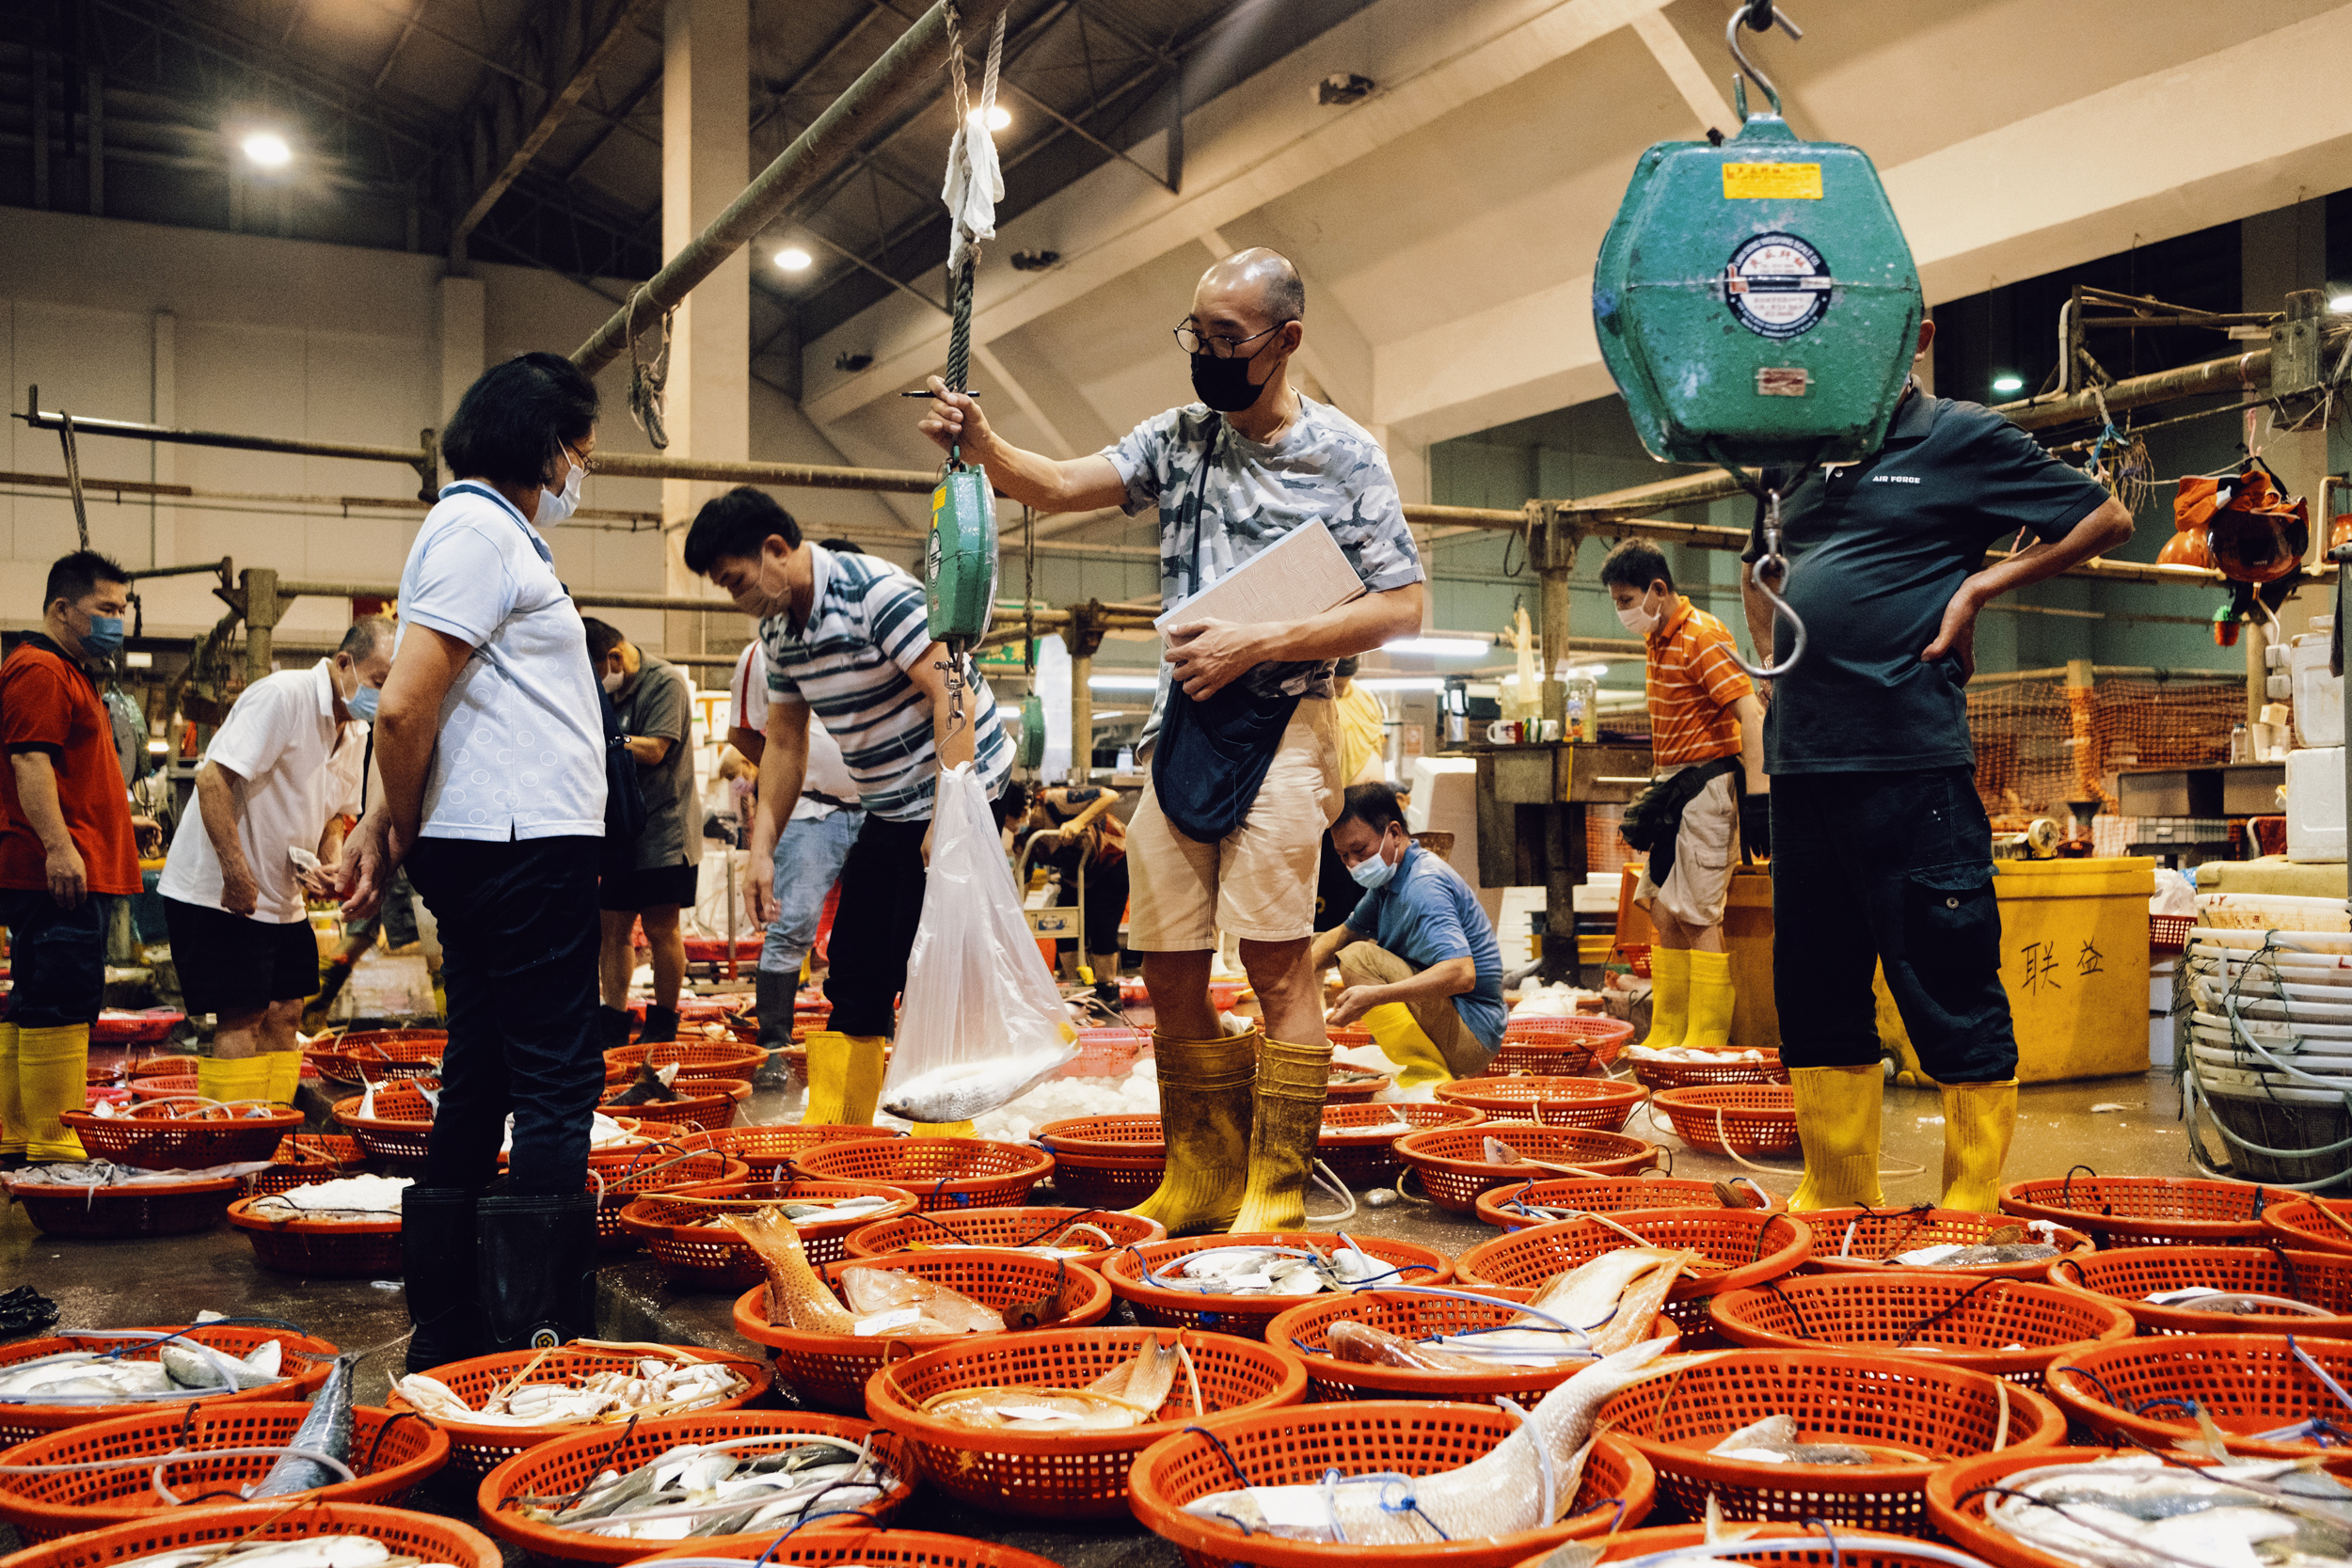 Davidson Goh stands at his weighing scale among baskets of fish.